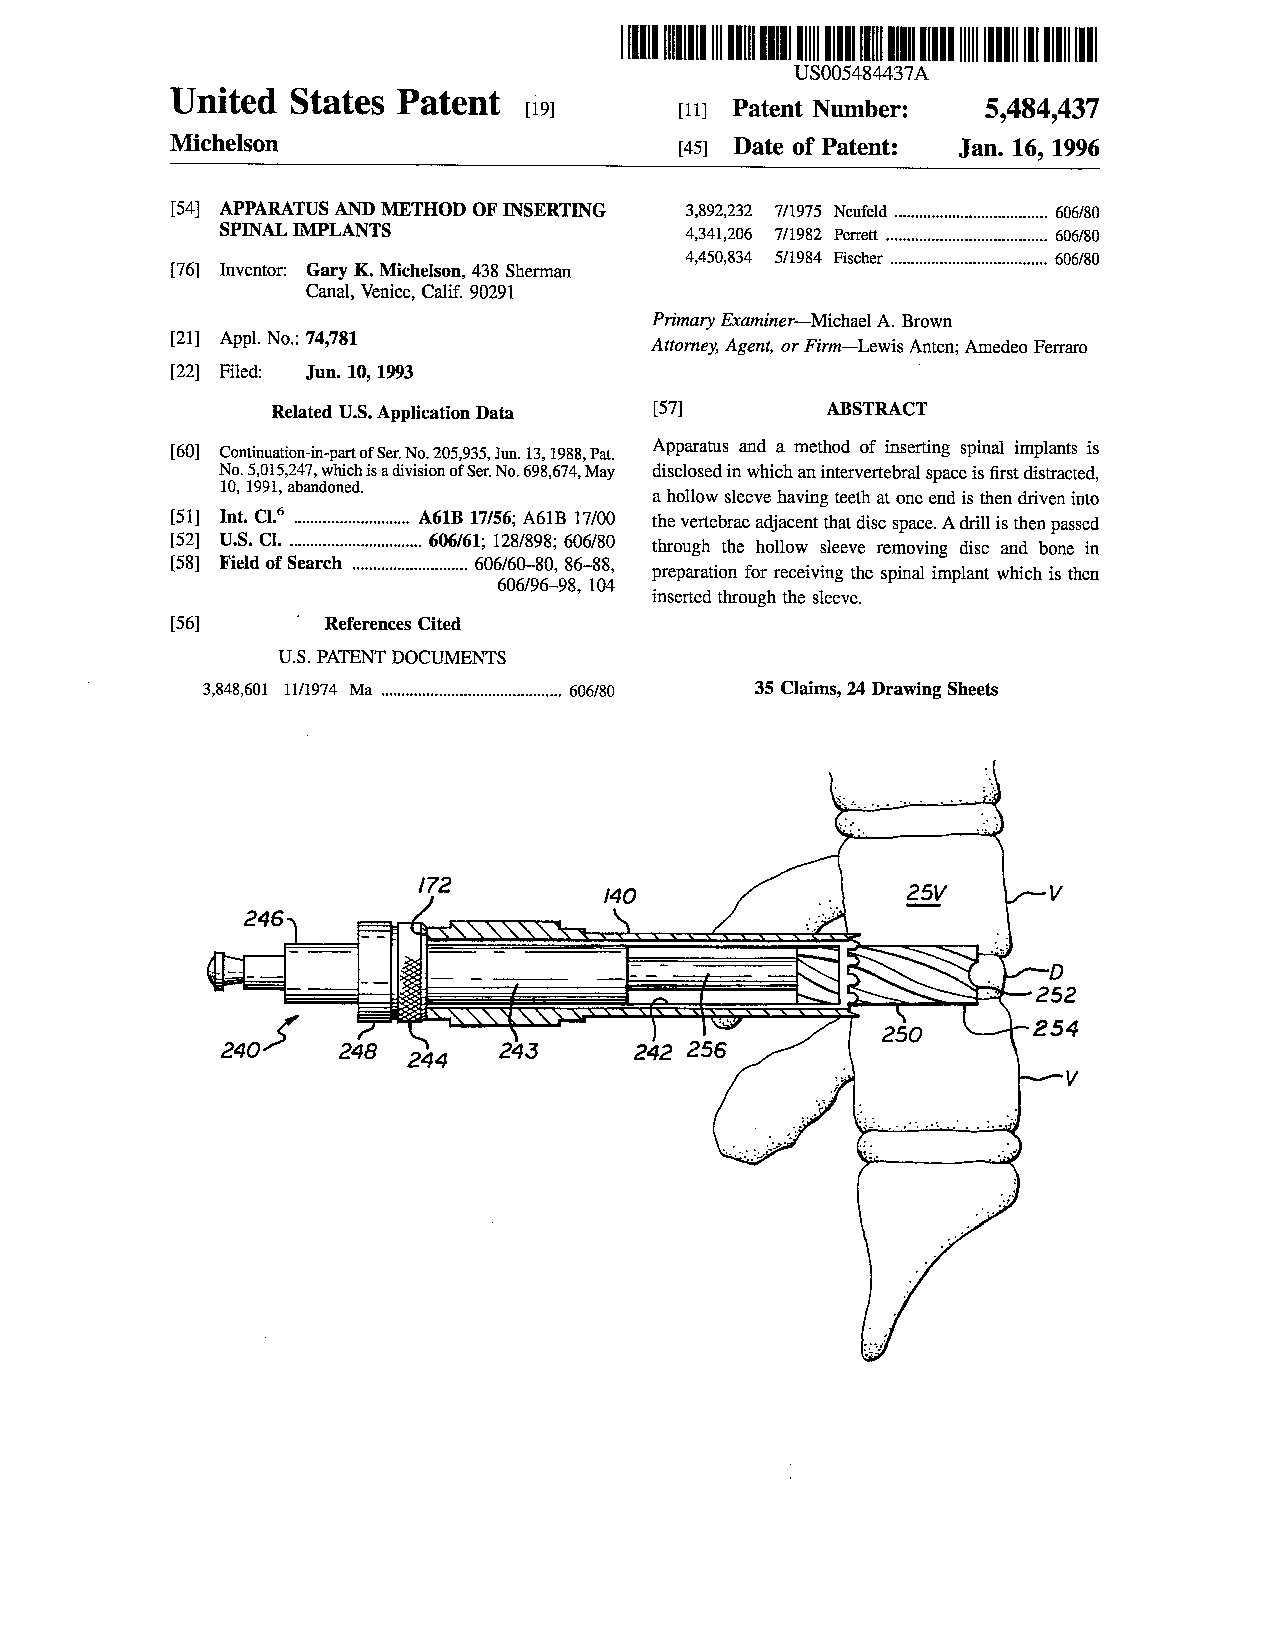 Apparatus and method of inserting spinal implants - Patent 5,484,437